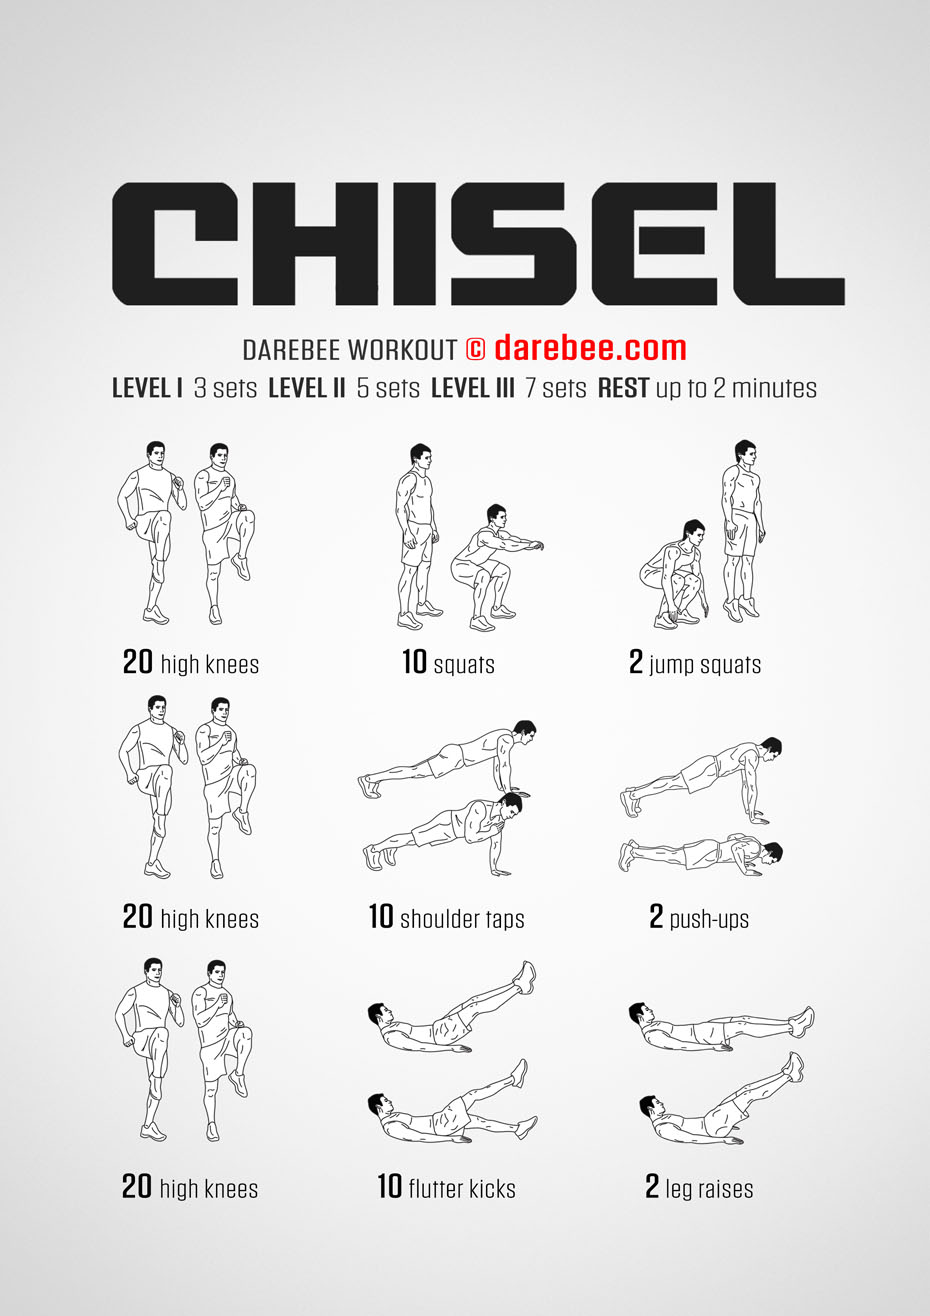 what is chisel workout?